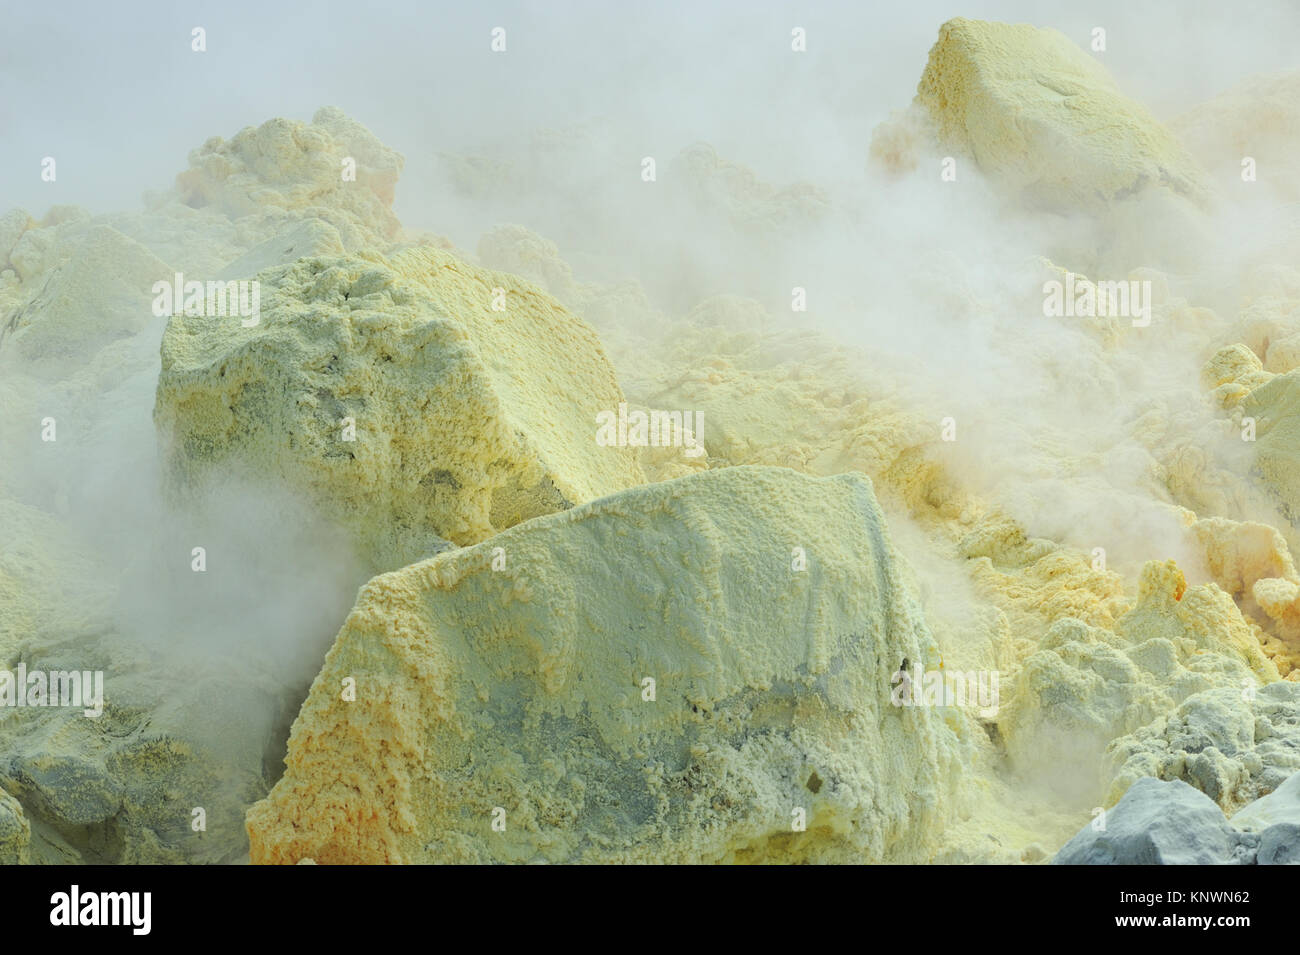 https://c8.alamy.com/comp/KNWN62/clouds-of-sulphuric-acid-laden-steam-billow-from-active-fumaroles-KNWN62.jpg